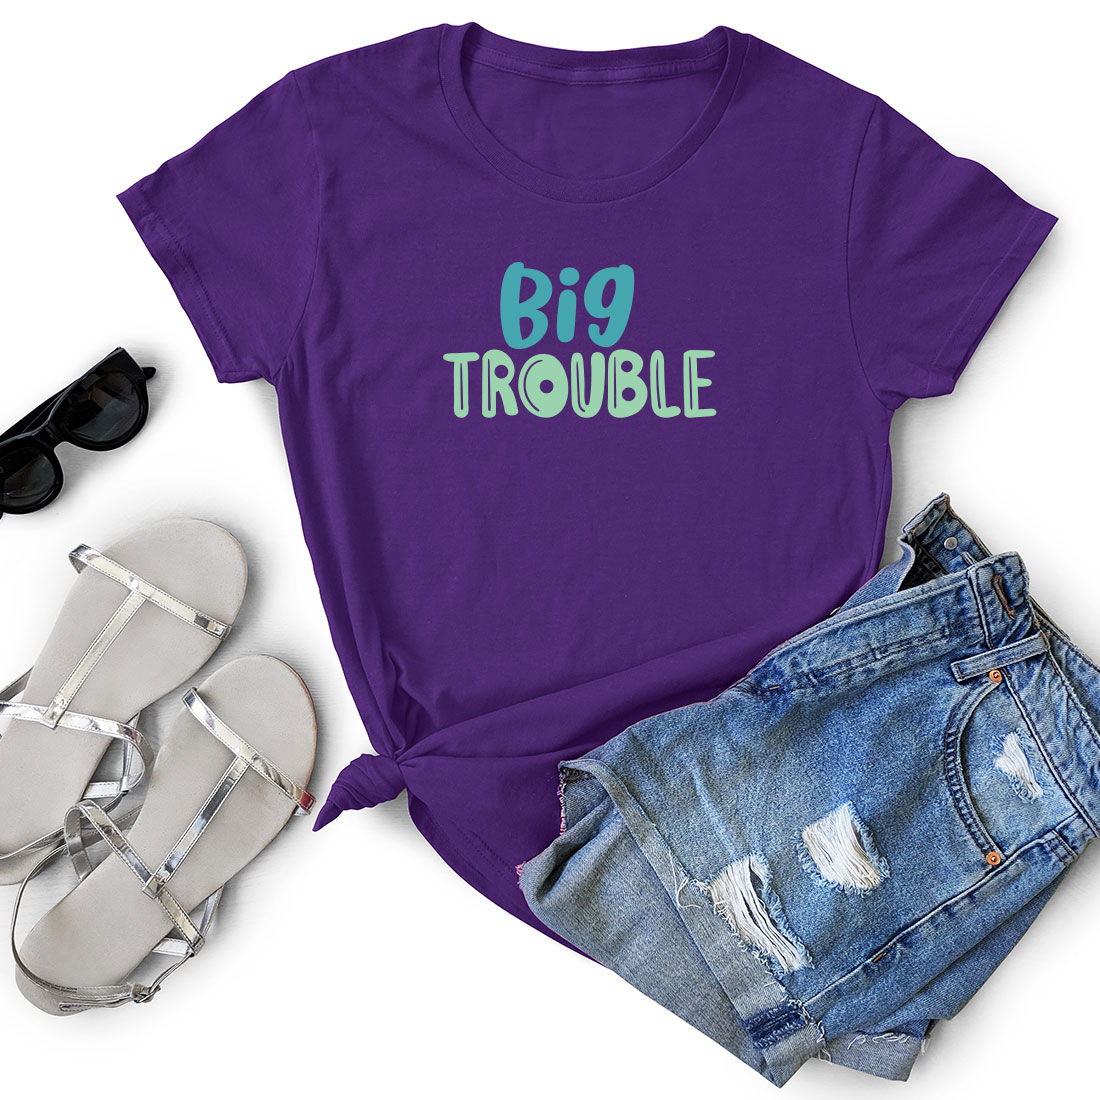 Purple shirt that says big trouble next to a pair of shorts.